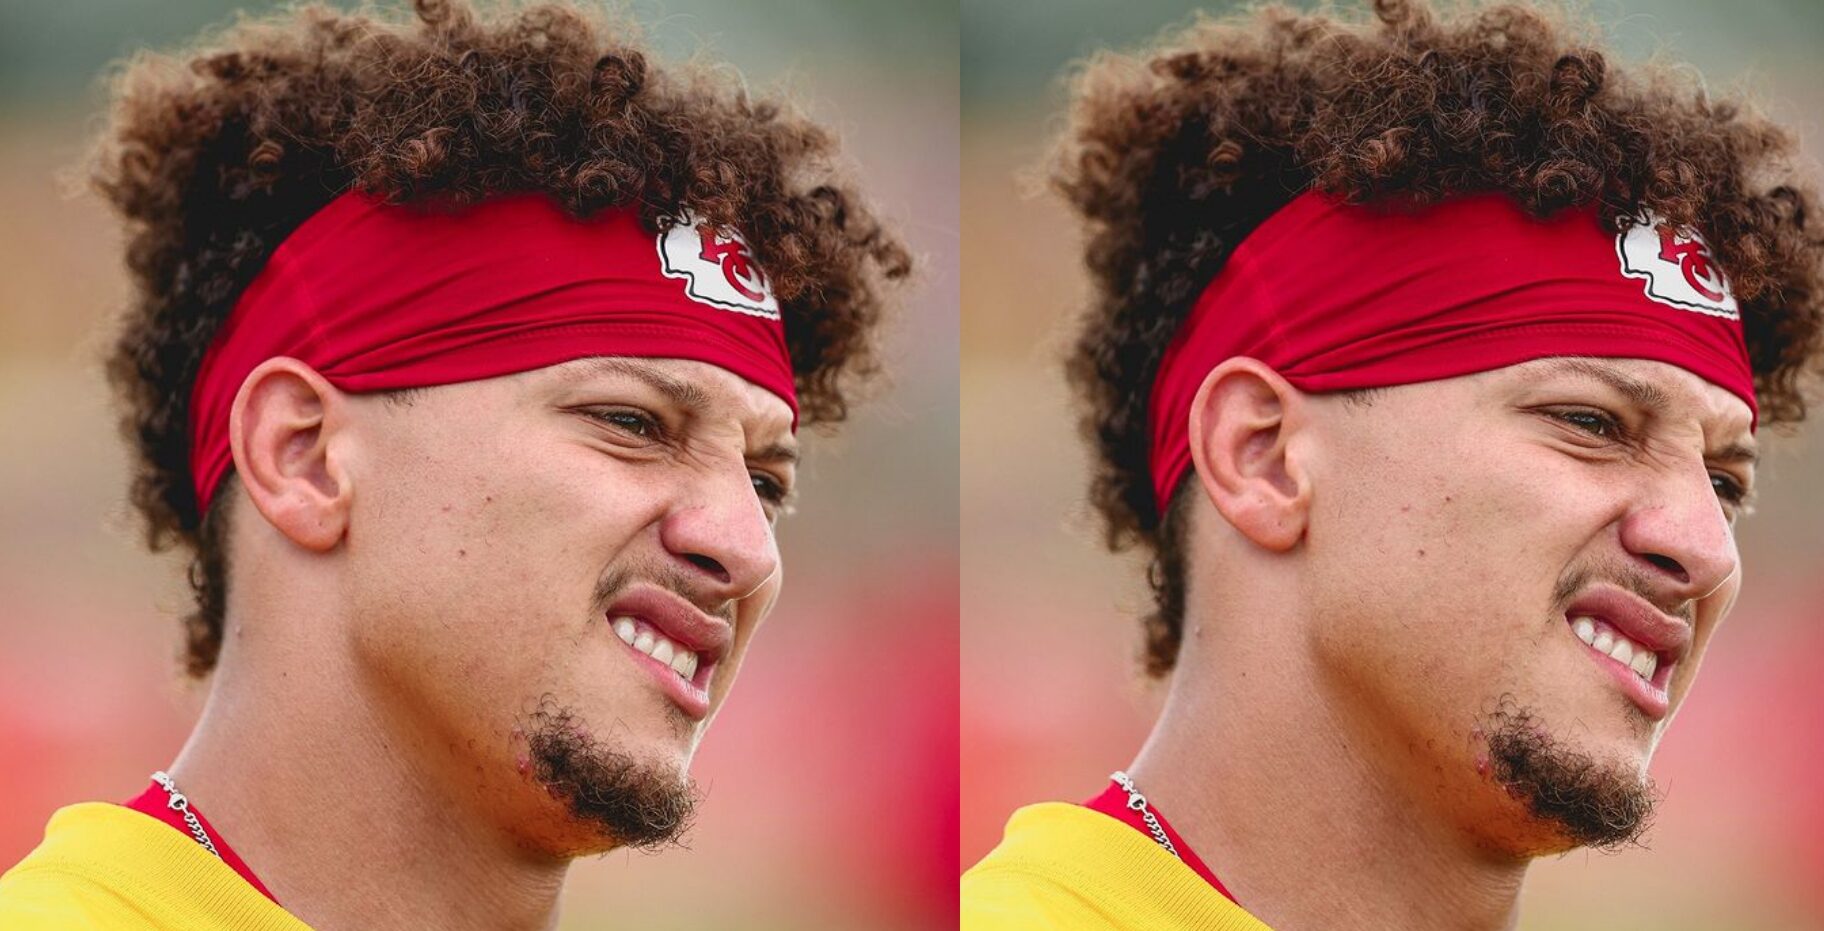 n a shocking revelation, NFL star Patrick Mahomes was brought to tears after discovering a long-hidden secret kept by his wife, Brittany Matthews, for over a decade.

"How could she hide this from me for 12 years?" exclaimed Mahomes, visibly emotional and grappling with the newfound truth.

Details of the revelation remain undisclosed, leaving fans and the public in suspense about the nature of the secret. The couple, known for their high-profile relationship, has yet to comment further on the matter.

As the news circulates, social media is buzzing with speculation and support for the quarterback, with fans expressing sympathy for Mahomes during this difficult time. The couple's journey through this revelation is sure to capture the attention of many as more details unfold.